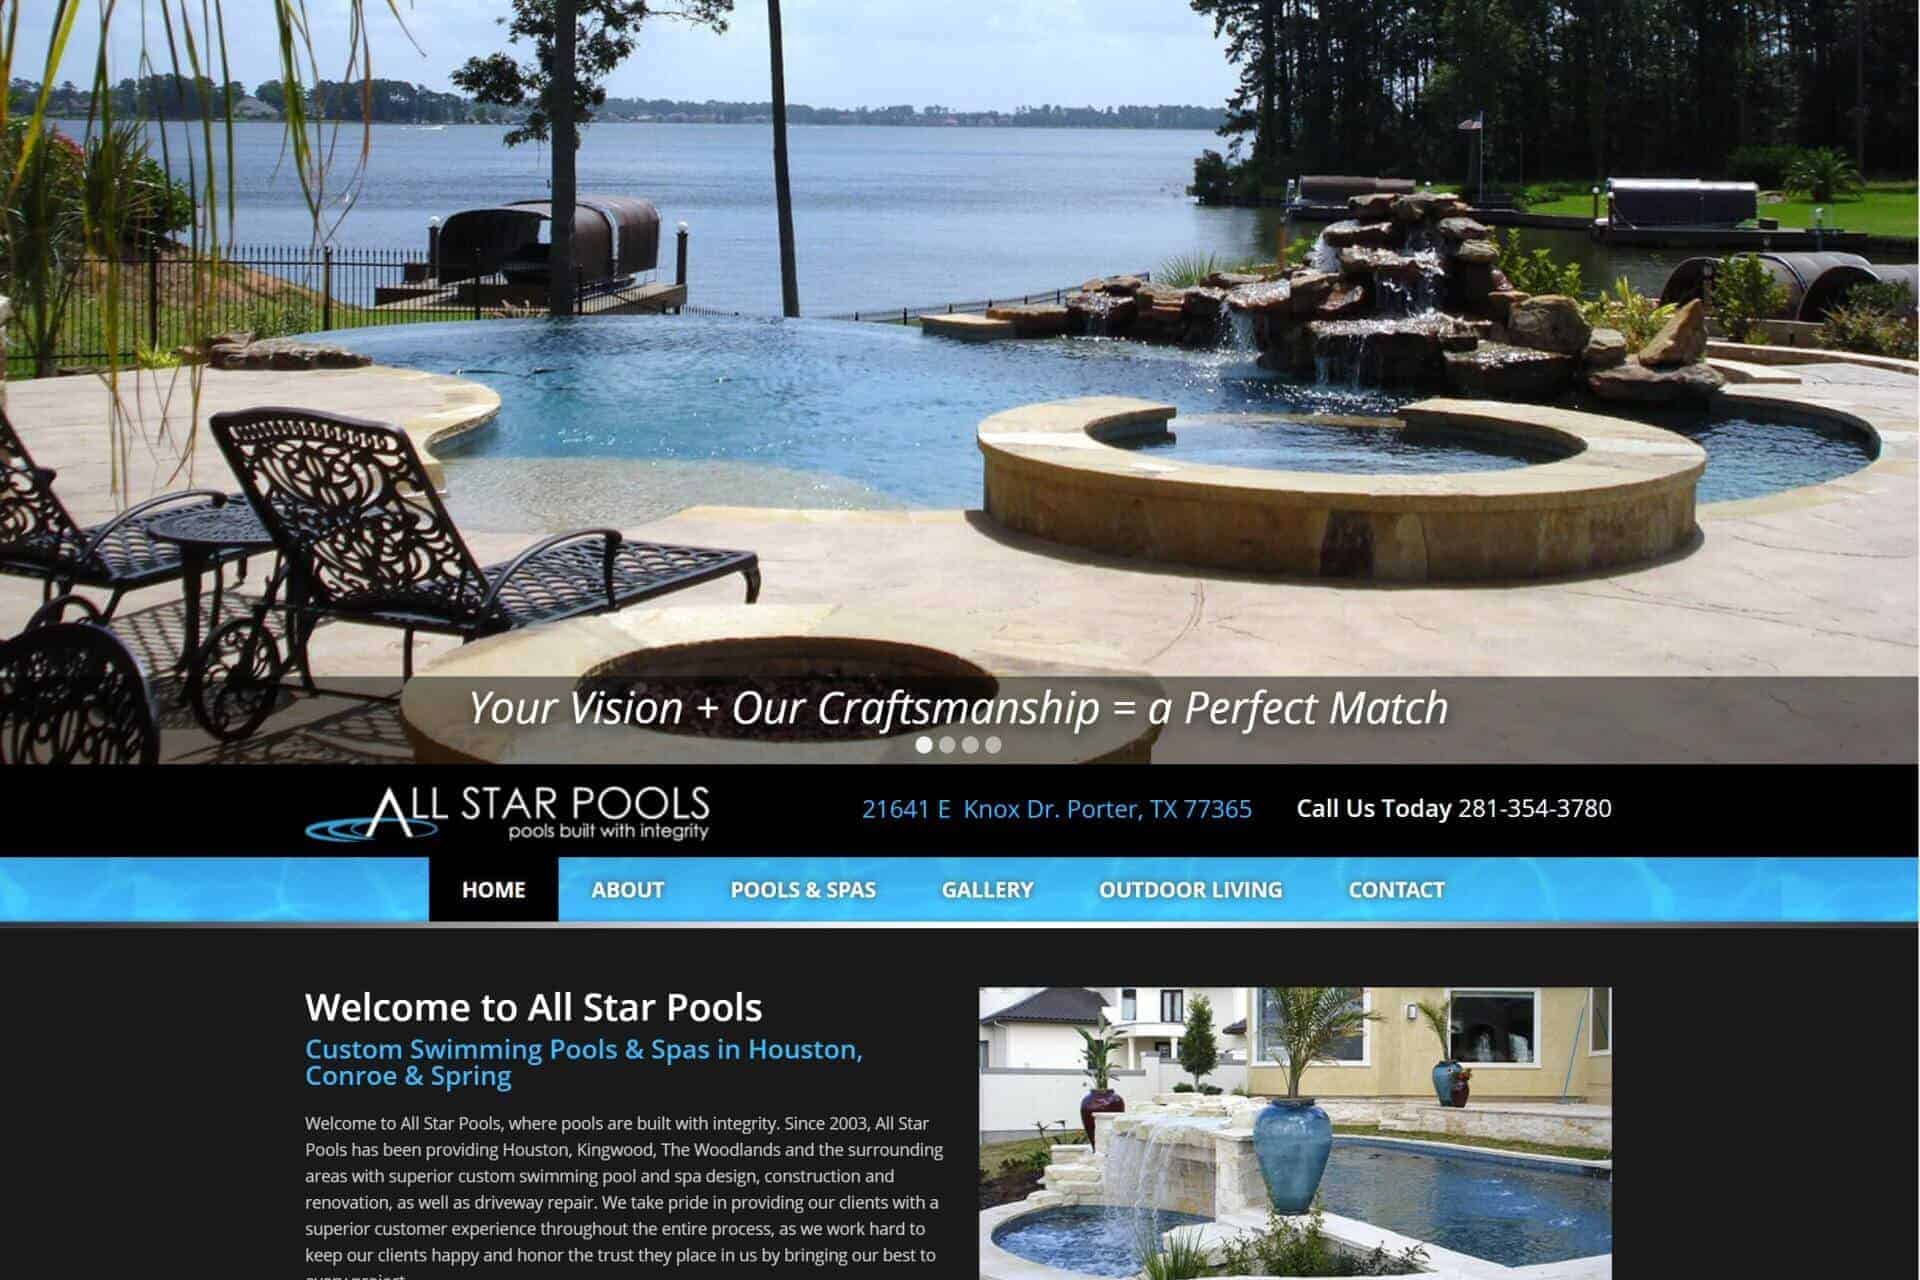 All Star Pools by Houston Home Revival